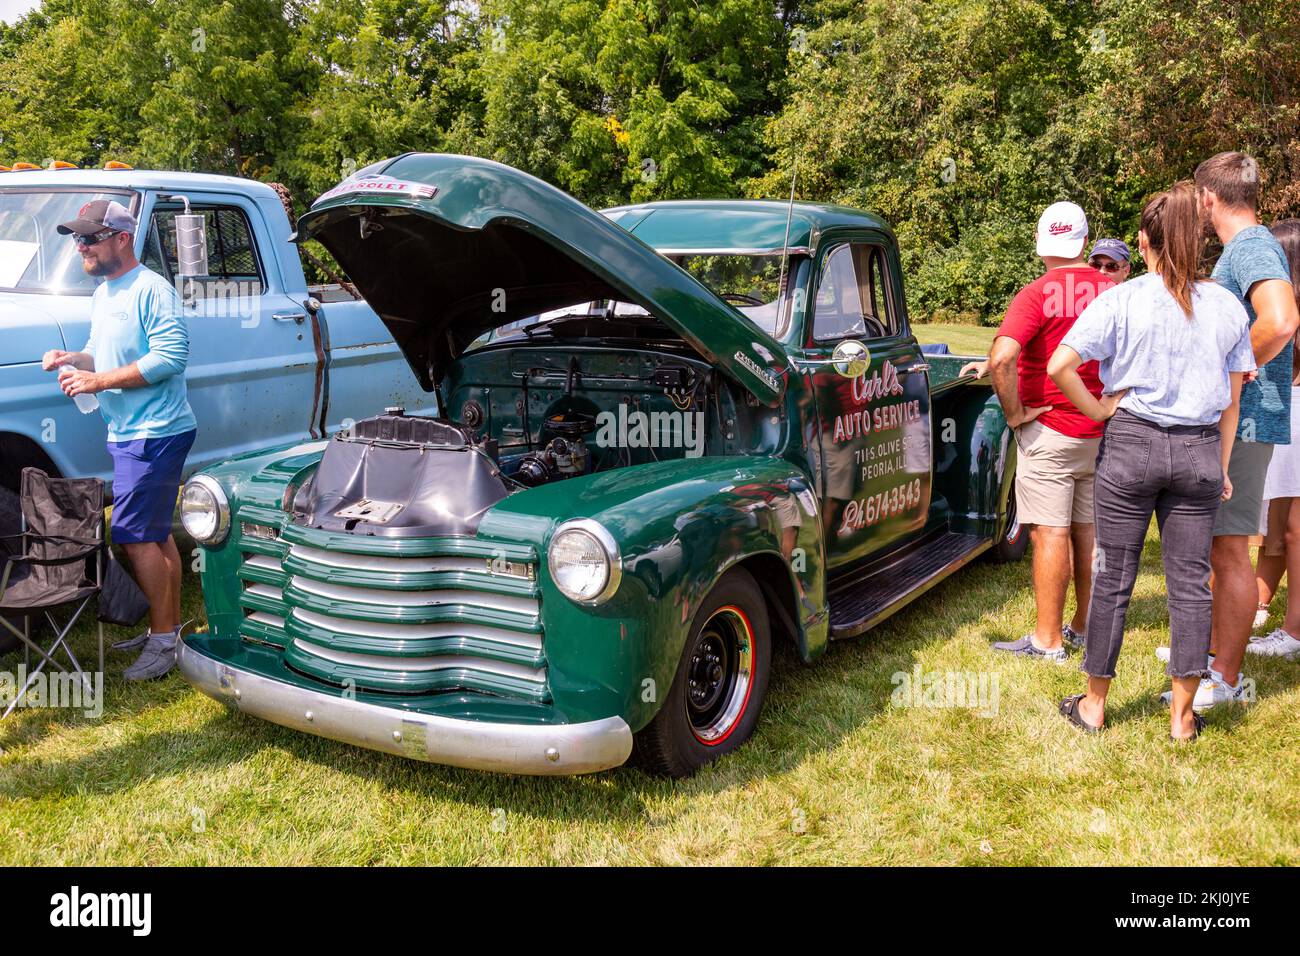 People gather around a classic green Chevrolet pick-up truck on display with the hood open at a car show in Fort Wayne, Indiana, USA. Stock Photo